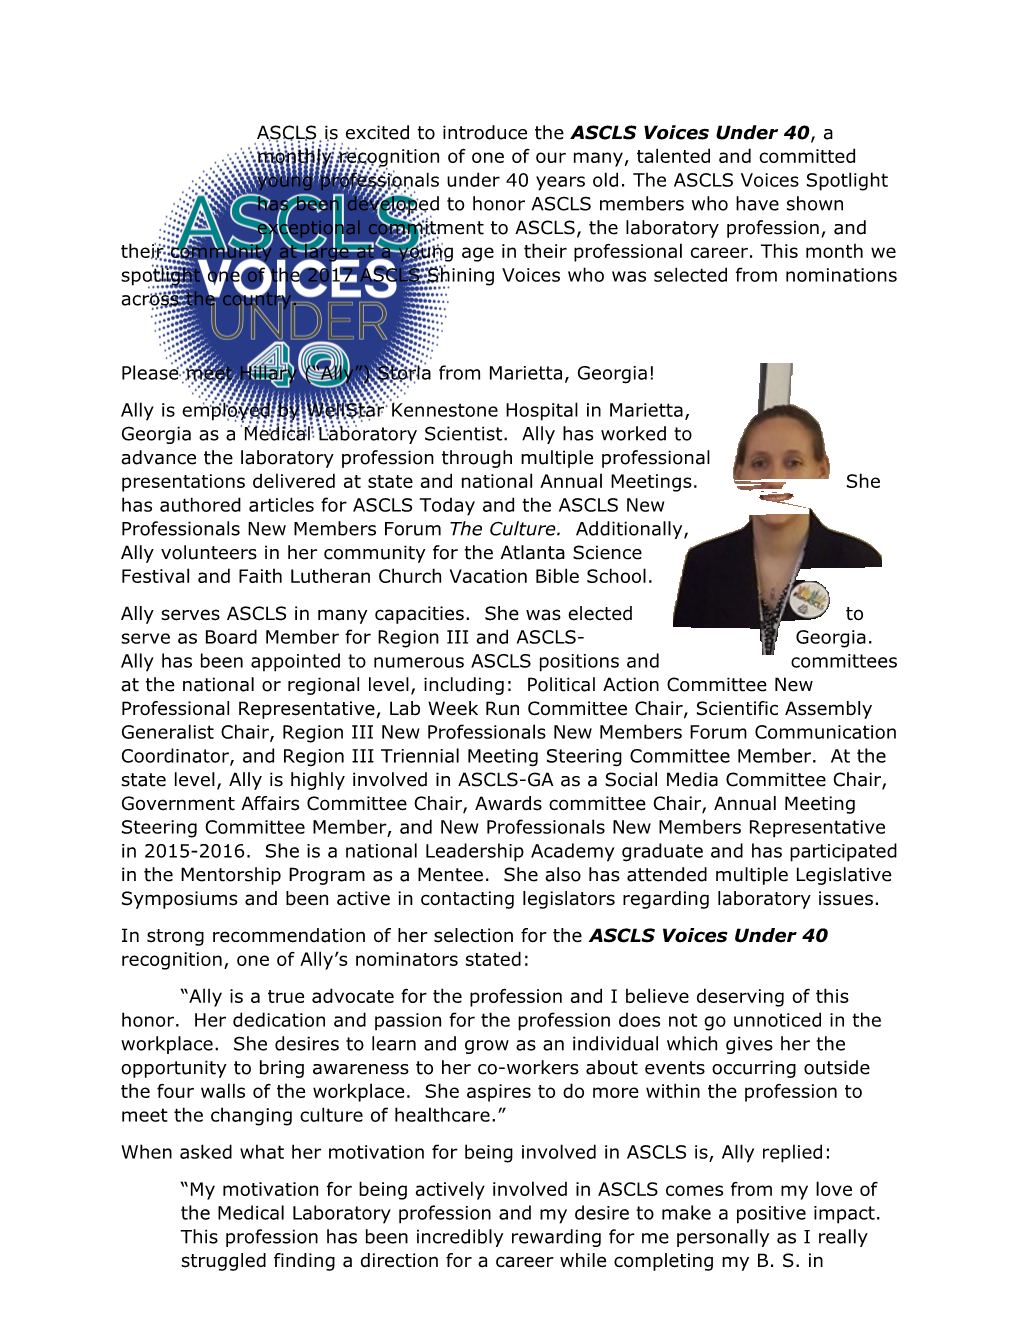 ASCLS Is Excited to Introduce the ASCLS Voices Under 40 , a Monthly Recognition of One